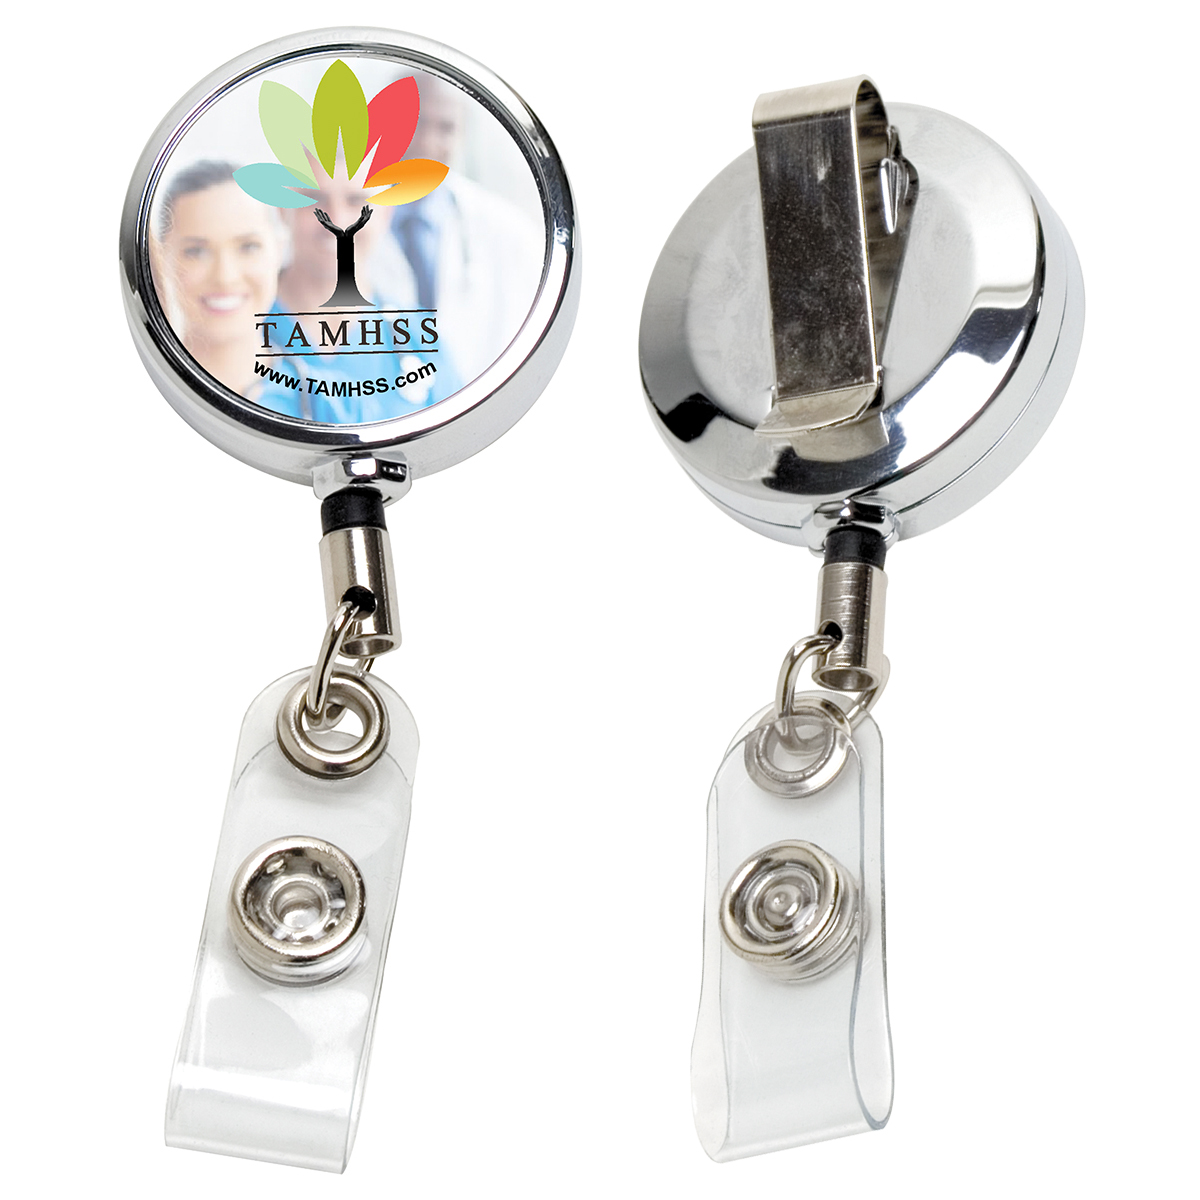 30” Cord Chrome Solid Metal Retractable Badge Reel and Badge Holder with Full Colour Vinyl Label Imprint*